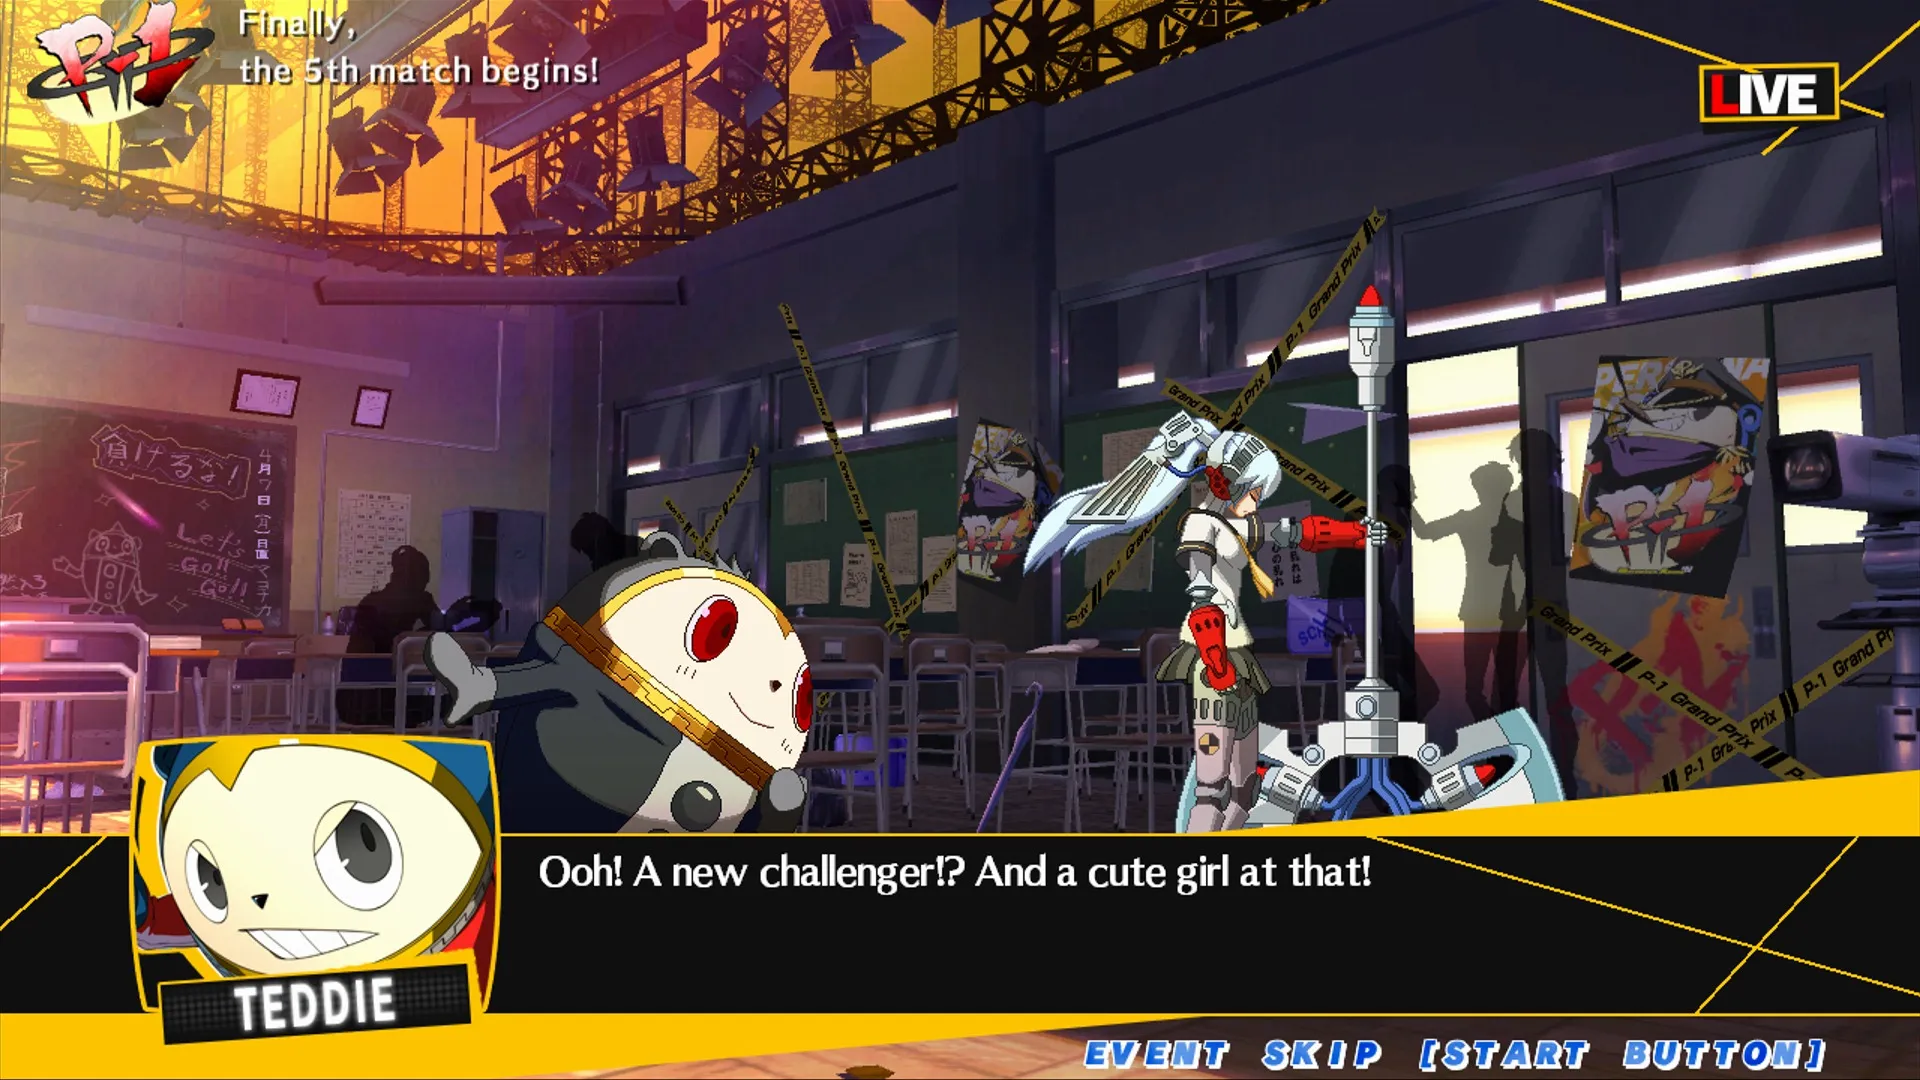 Persona 4 Arena Ultimax's Online Lobby References Arcade Fighting Games —  GAMINGTREND